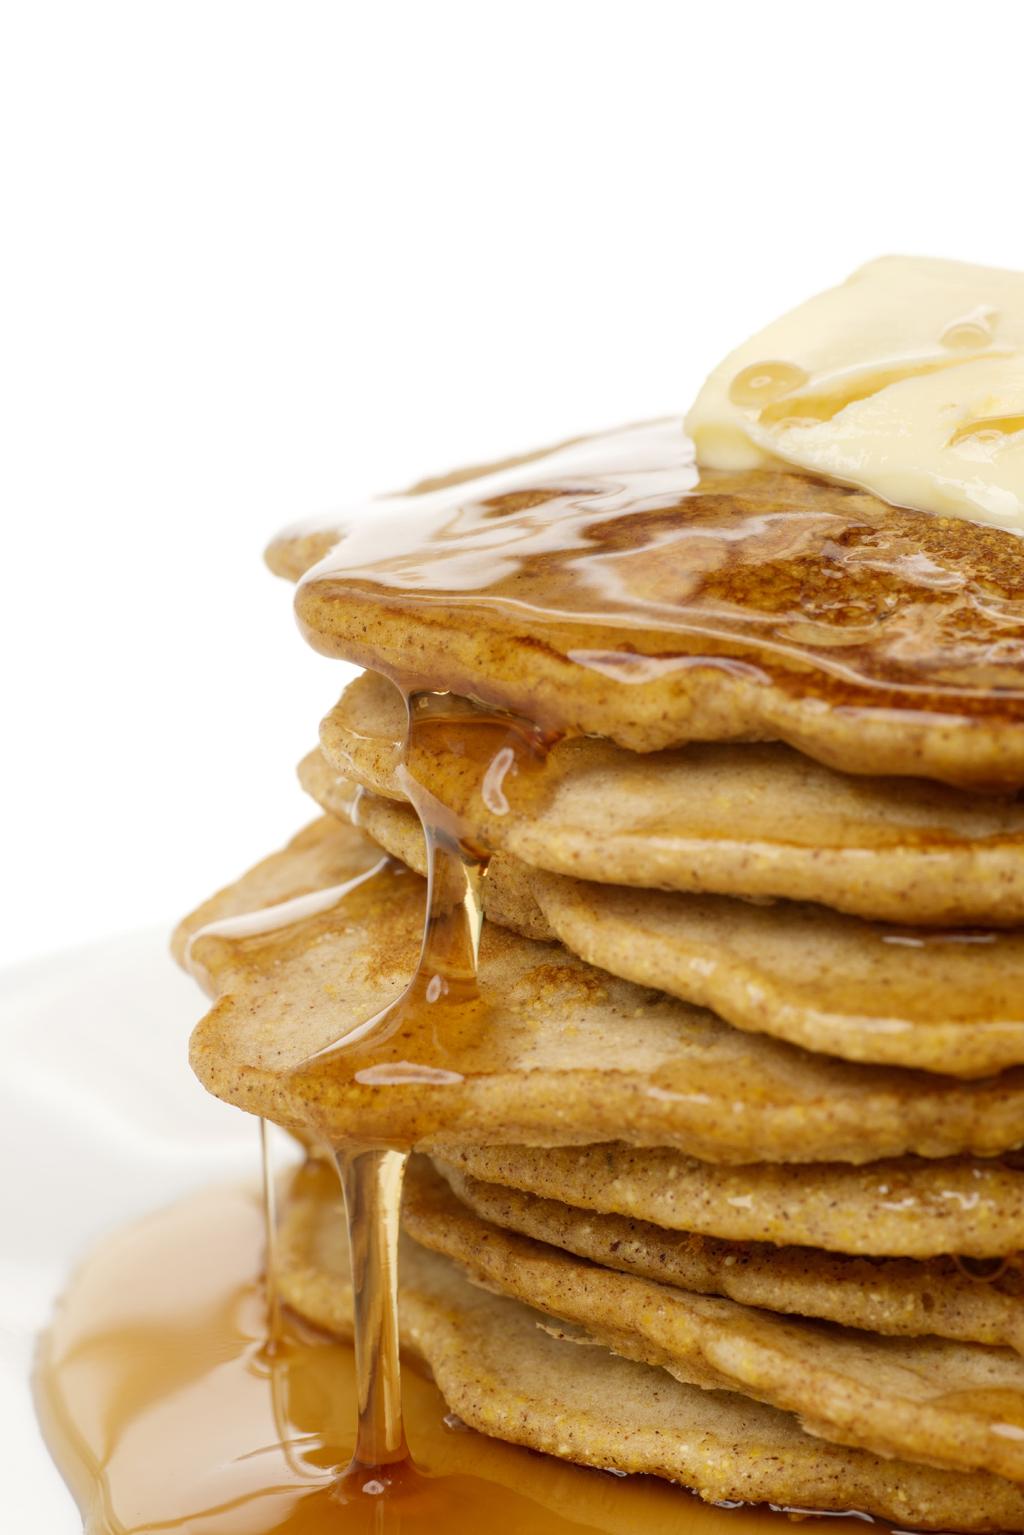 BREAKFAST STATIONS minimum 35 guests *action station with attending chef *Buttermilk Pancake Station per person $6.